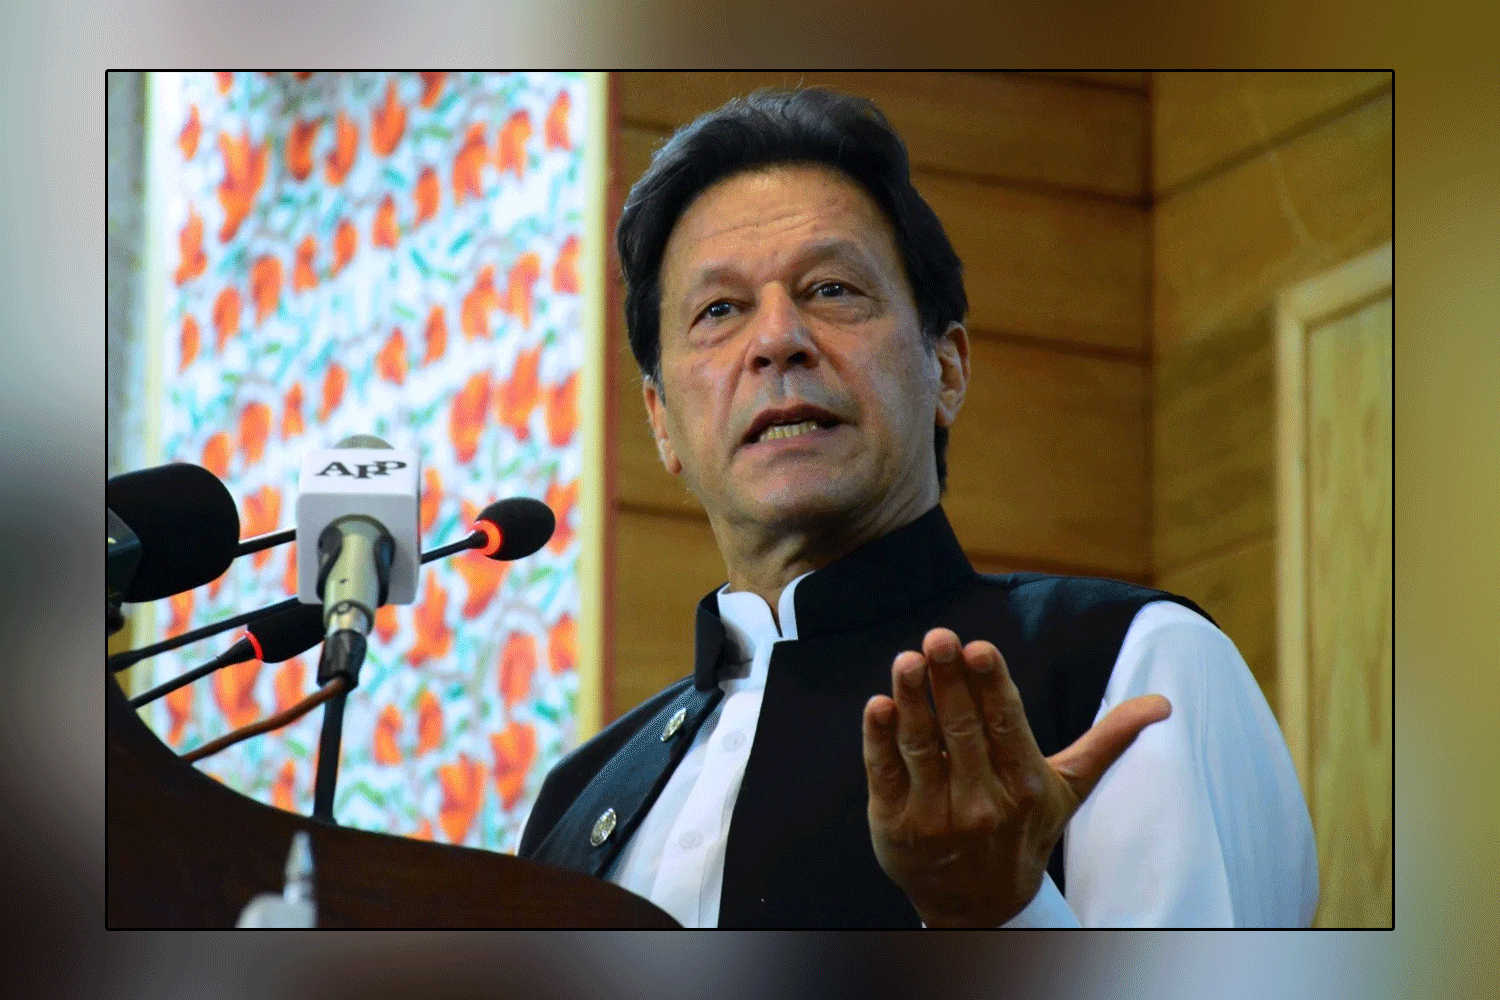 We have stabilized the economy but the debt is still high: PM Imran Khan